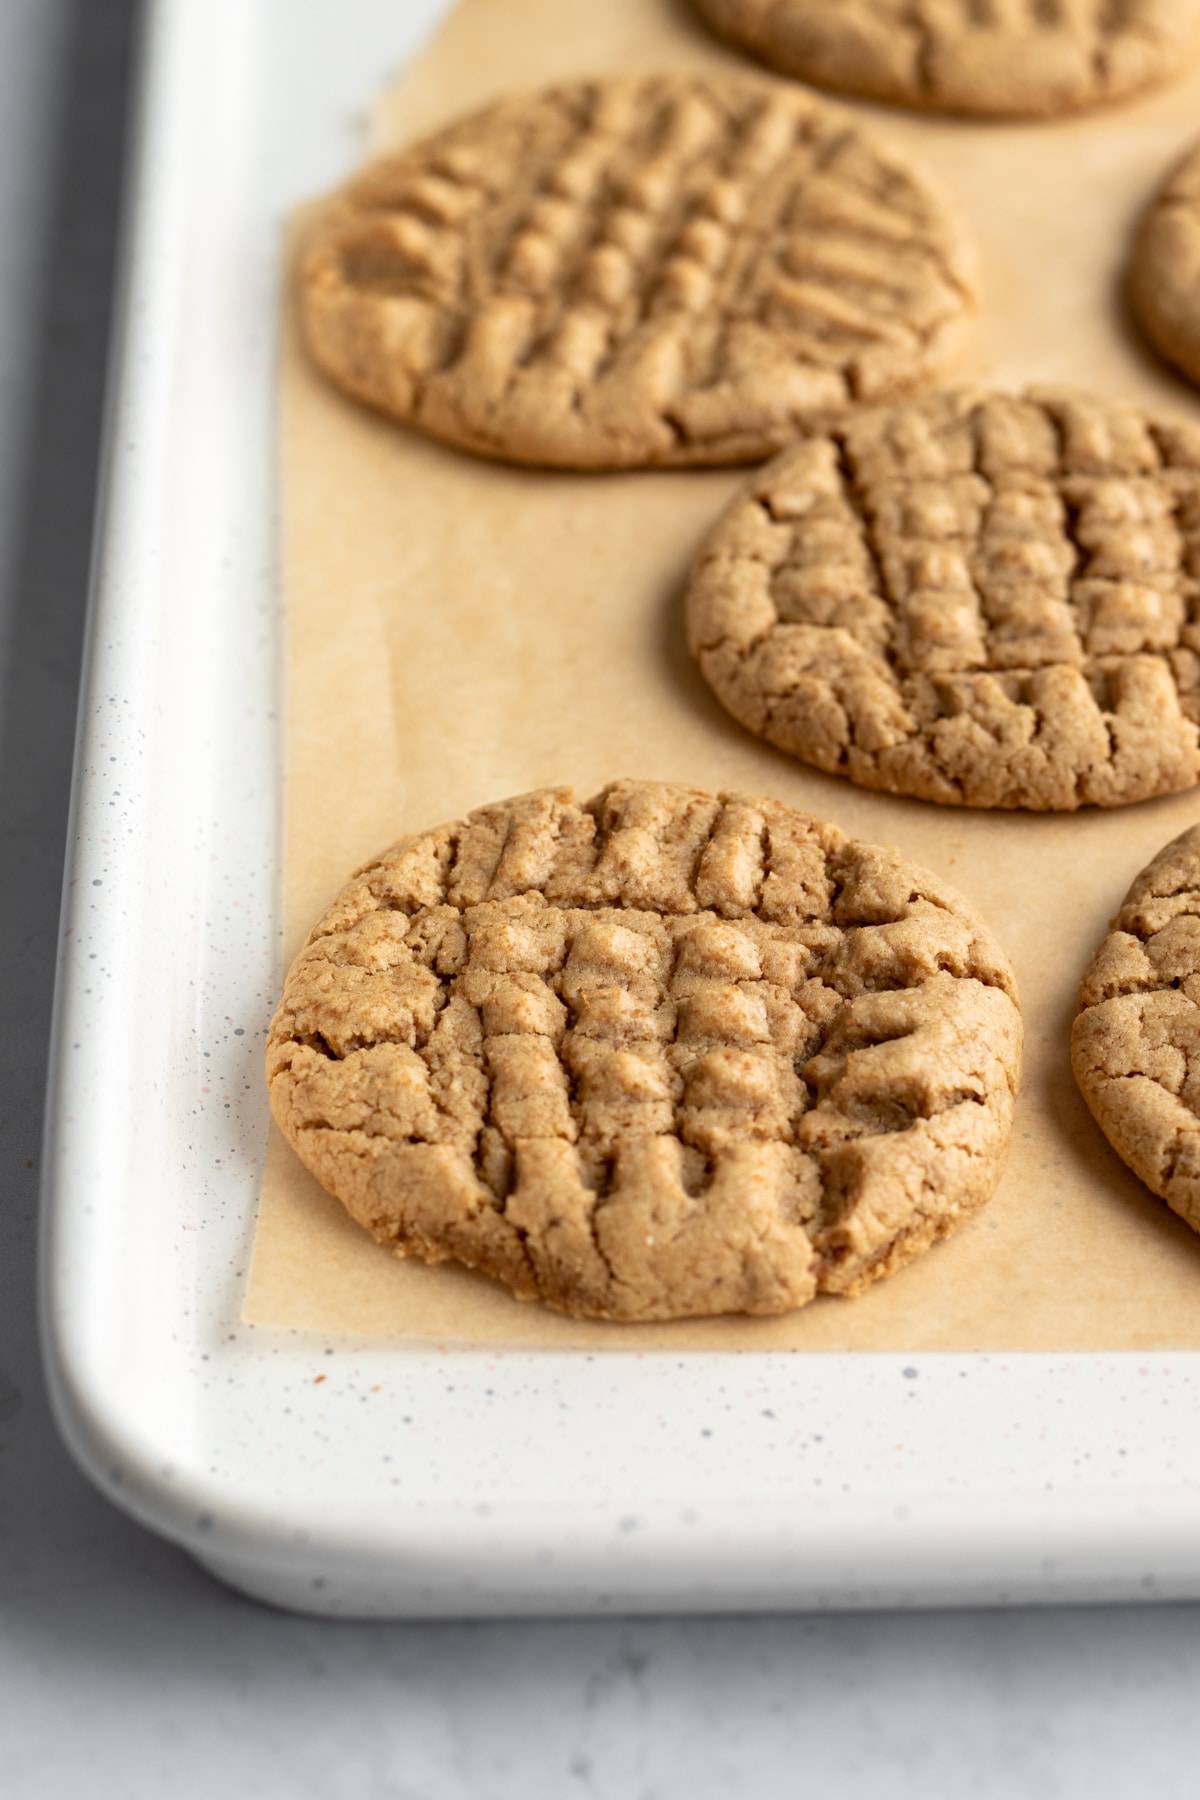 Freshly baked peanut butter cookies on a parchment lined baking sheet.